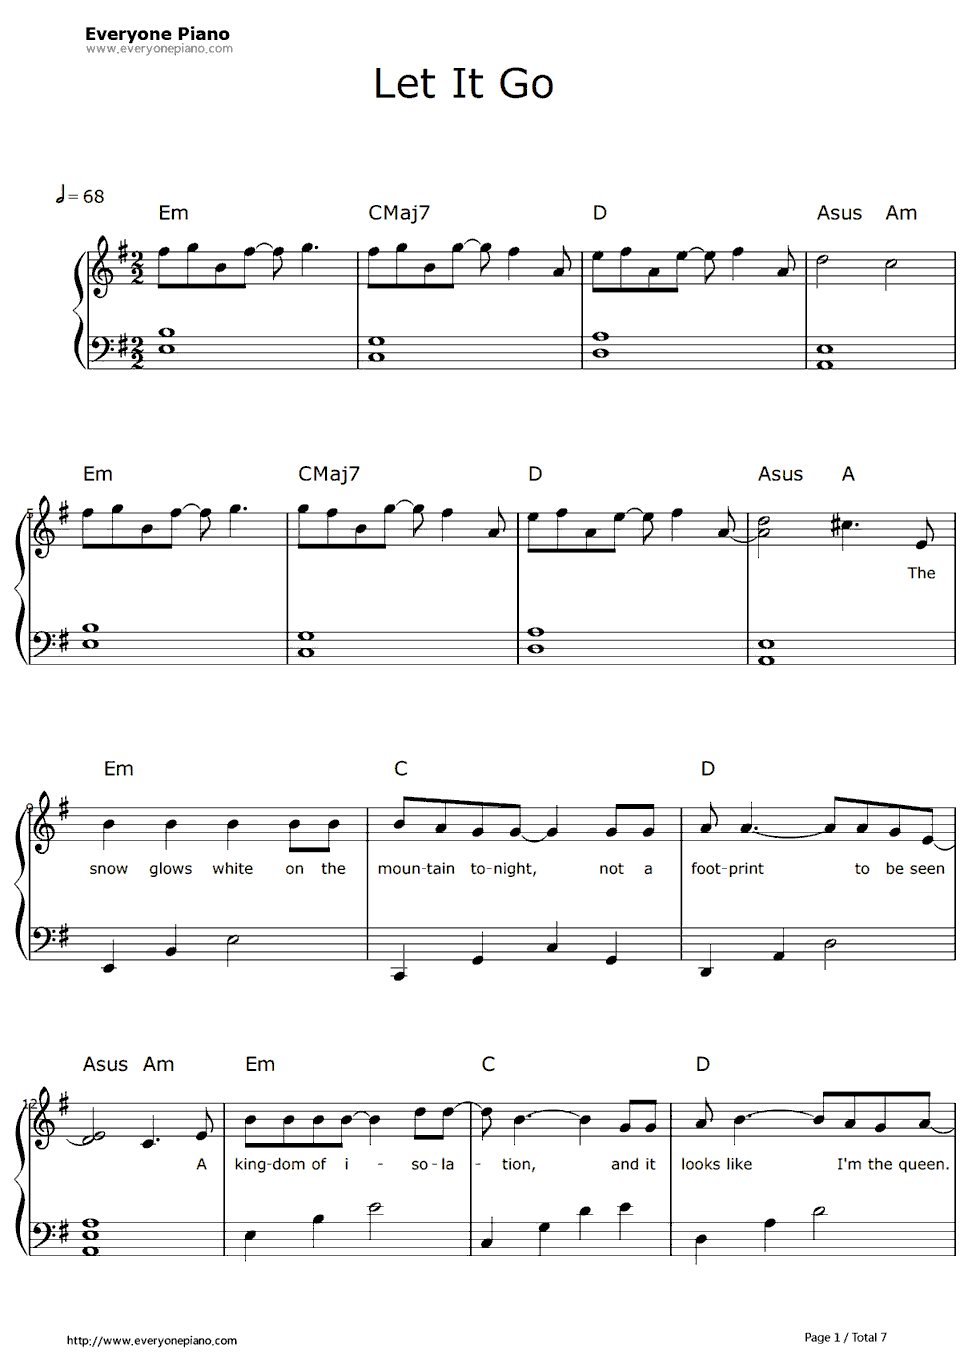 Free Let It Go Easy Version-Frozen Theme Sheet Music Preview 1 - Let It Go Violin Sheet Music Free Printable